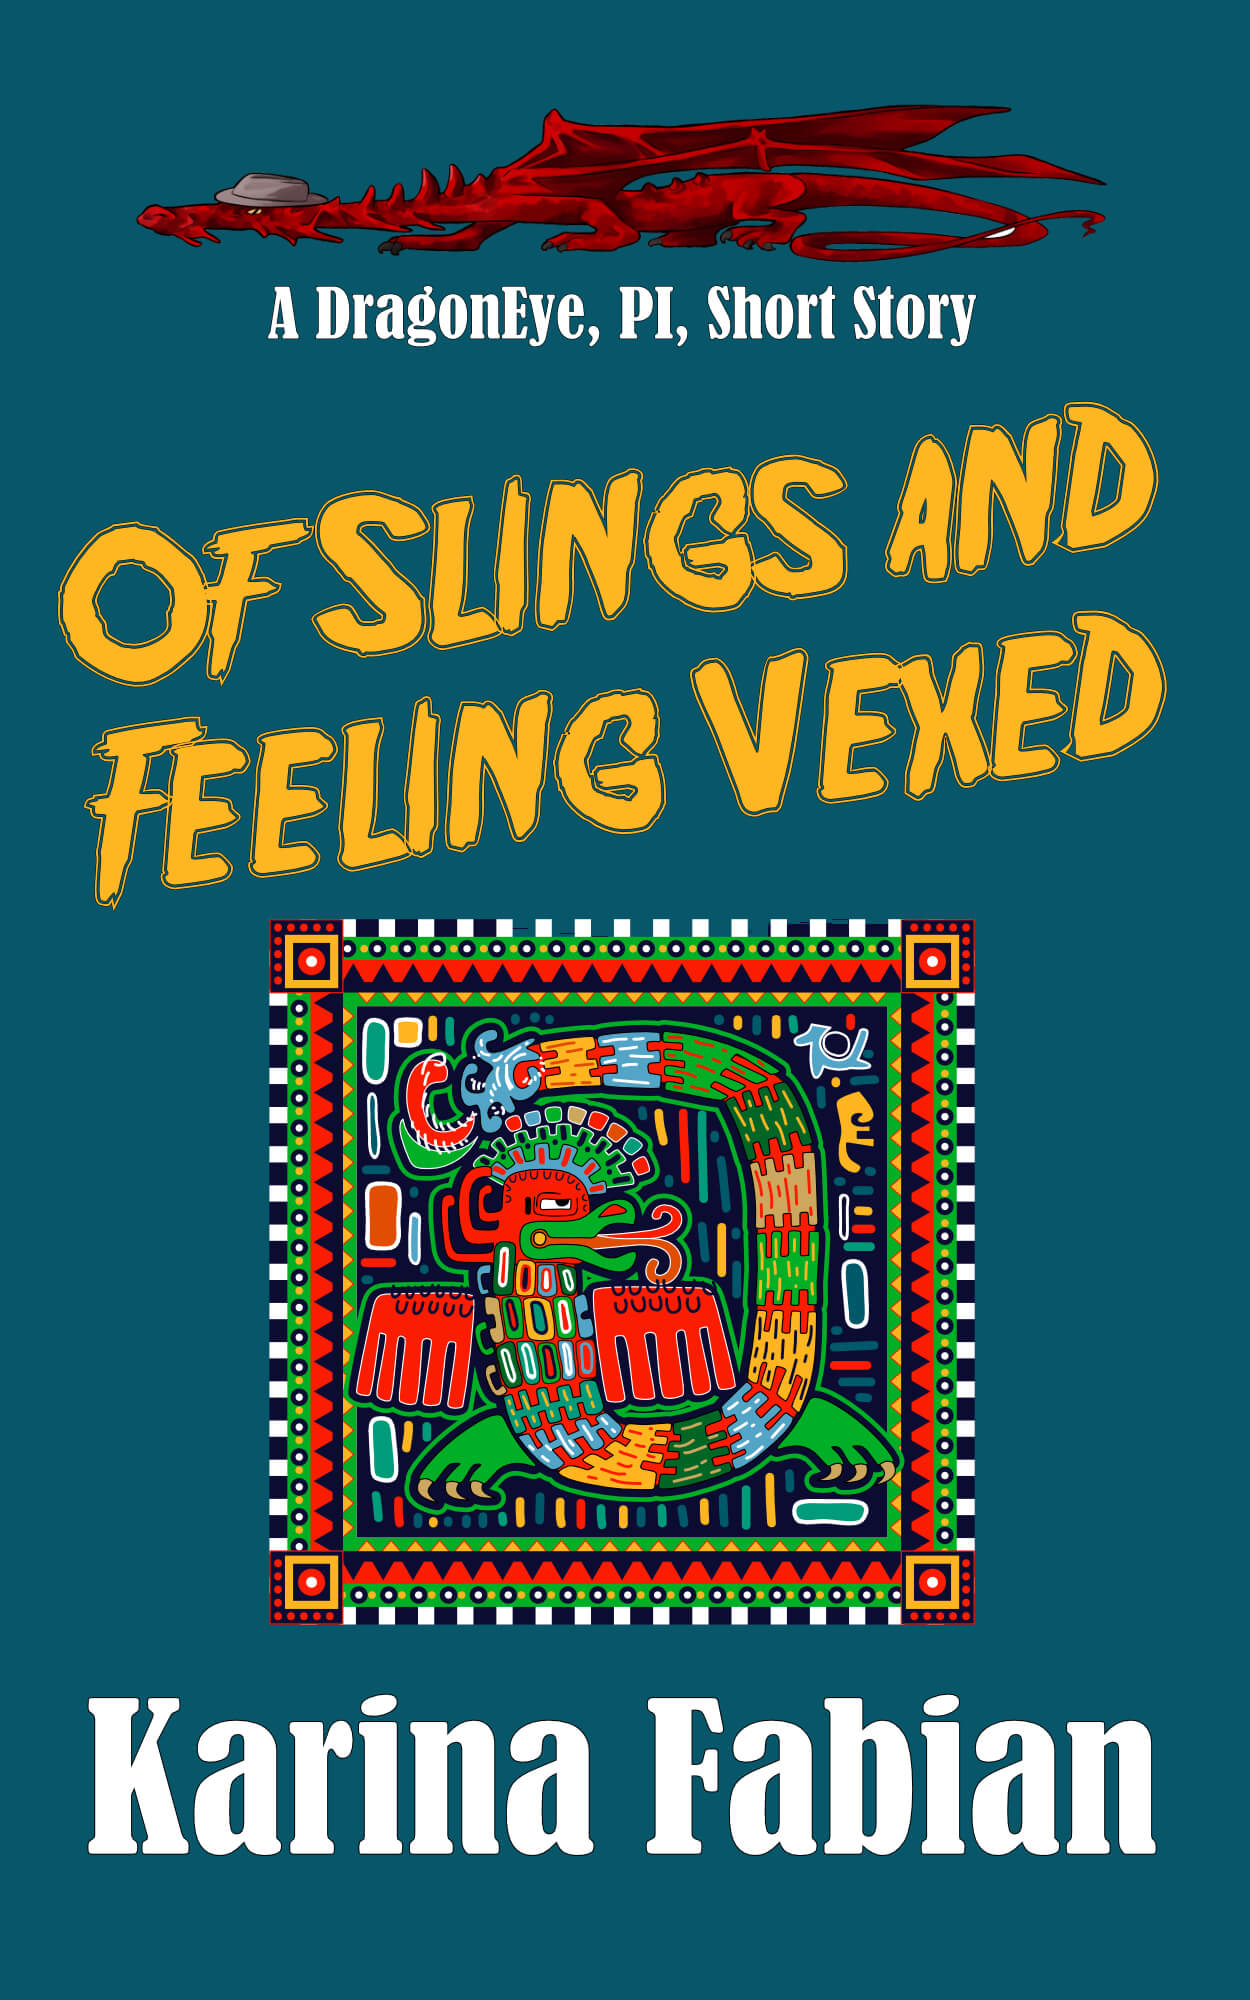 book cover of mayan art for title of Slings and Being Vexed